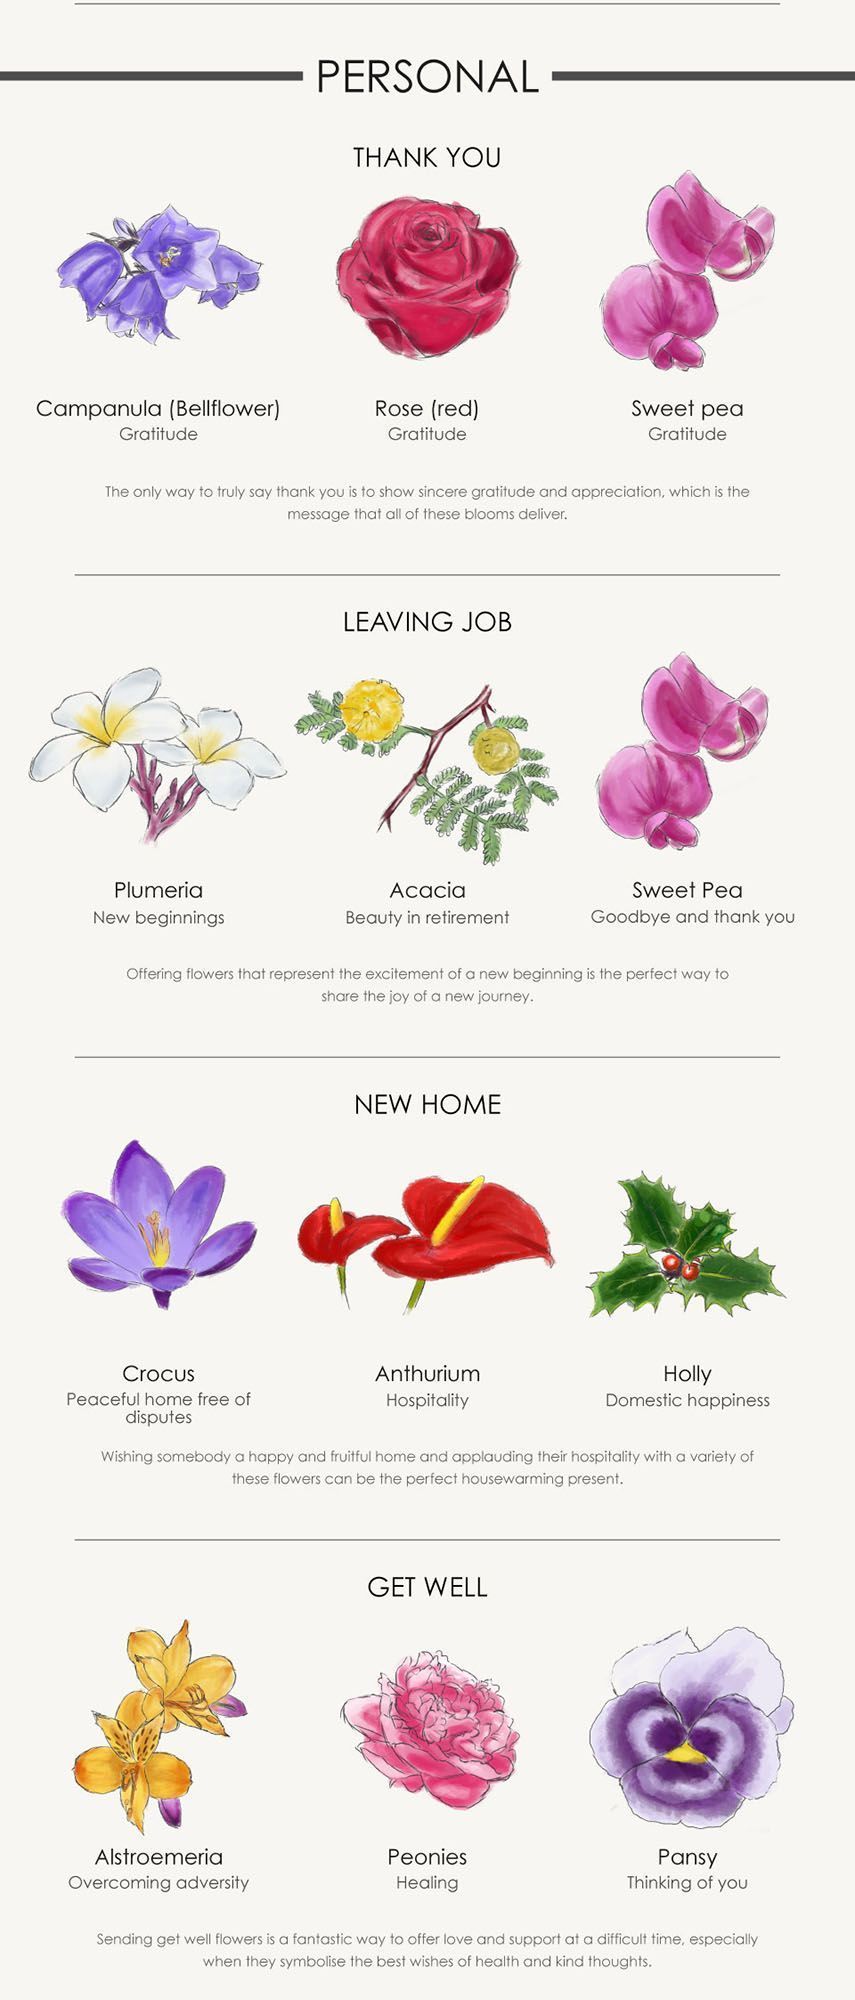 A Flower For Every Occasion: Your Complete Guide - A Flower For Every Occasion: Your Complete Guide -   18 beauty Design flower ideas